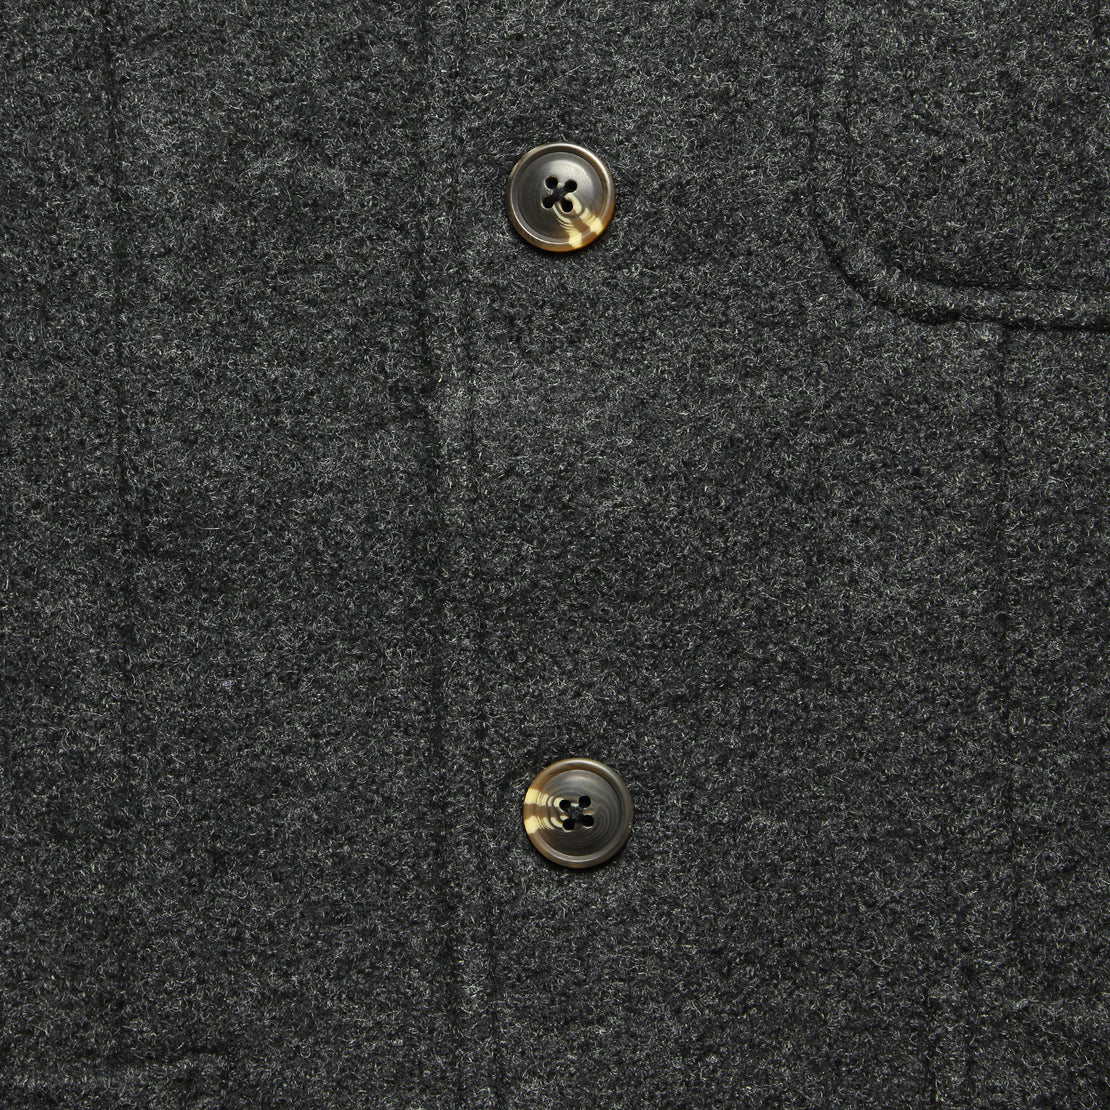 Burnham Knitted Wool Blazer - Charcoal - Grayers - STAG Provisions - Suiting - Sport Coat